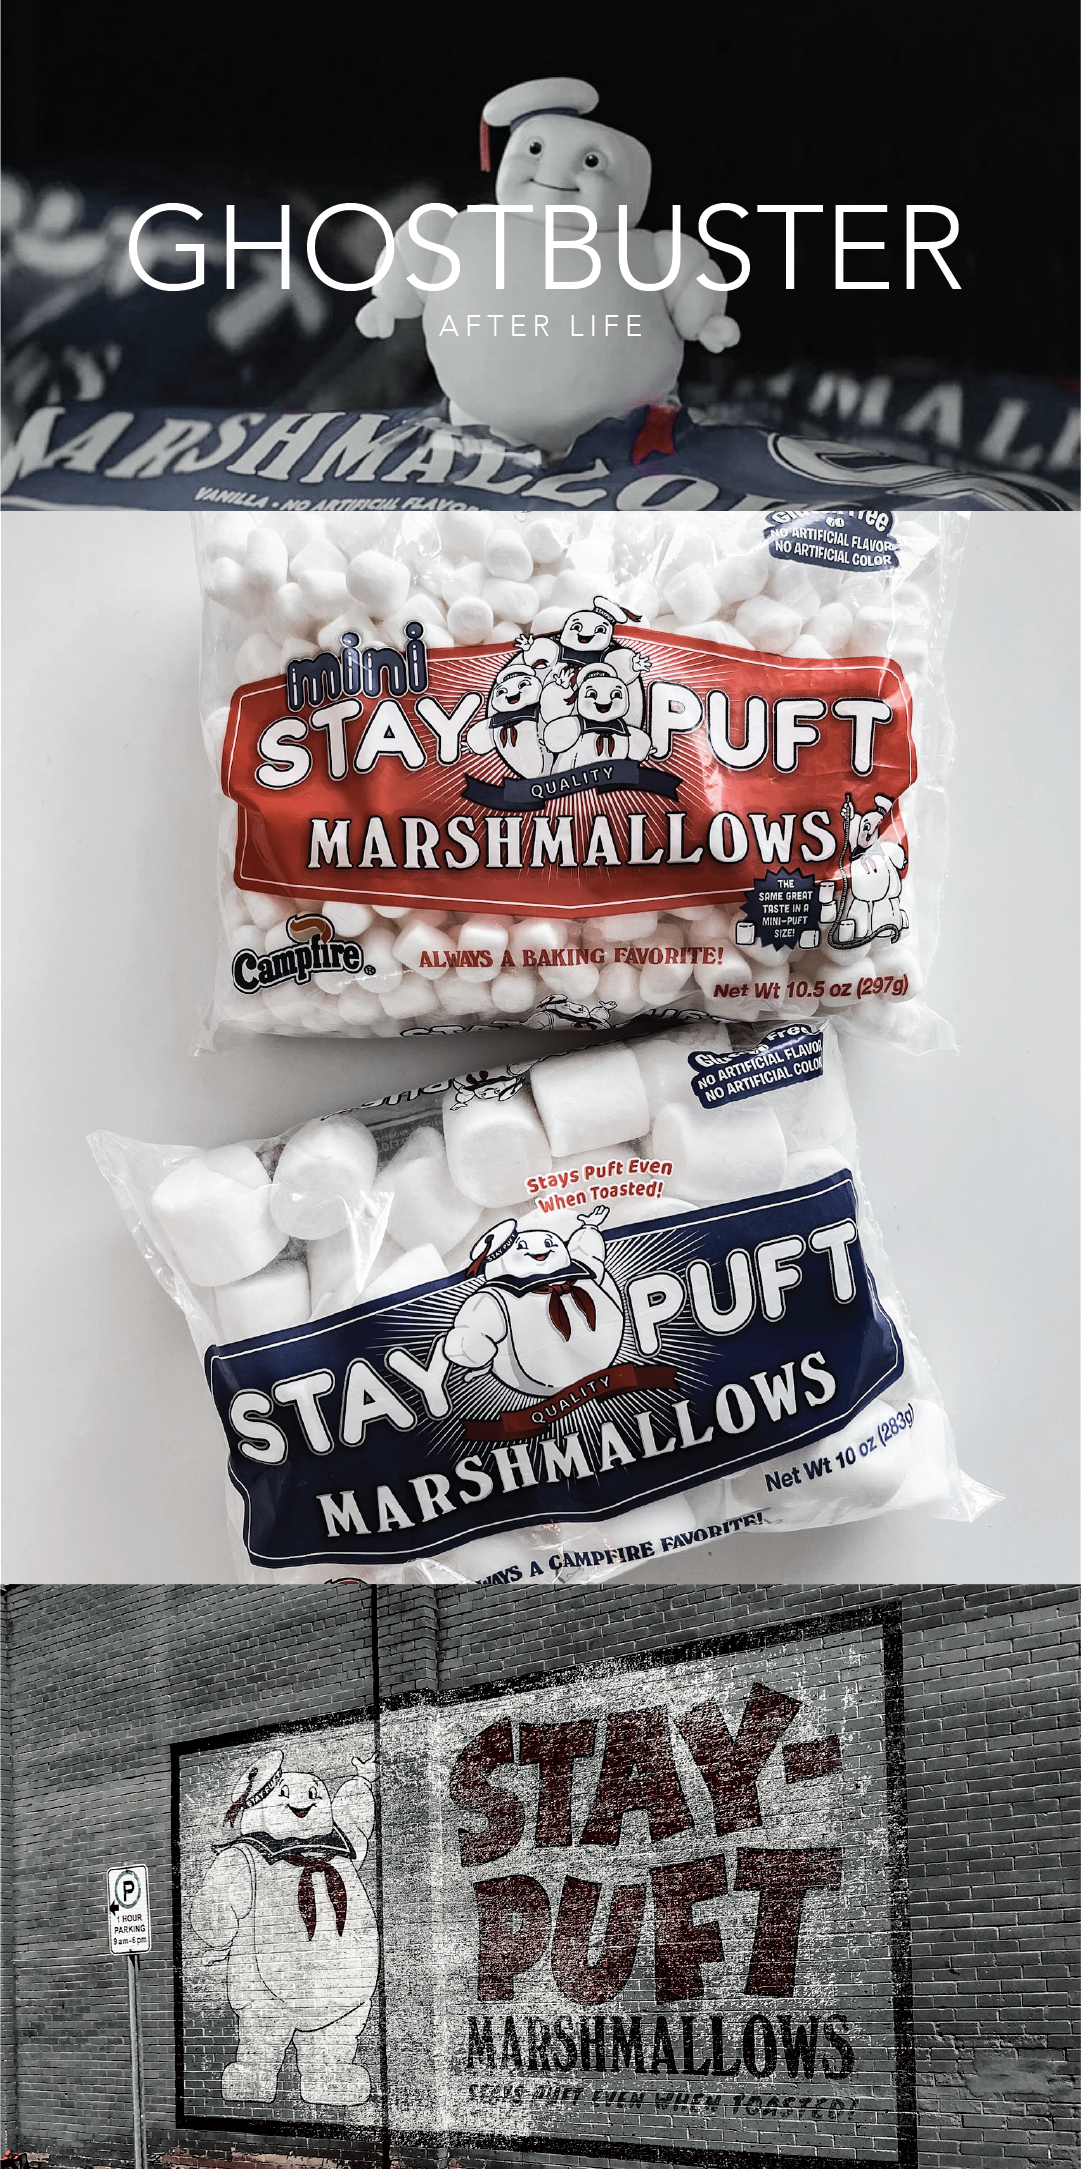  1.Staypuft Marshmallows  2.Staypuft Billboard  —  Ghostbusters Afterlife 2021  